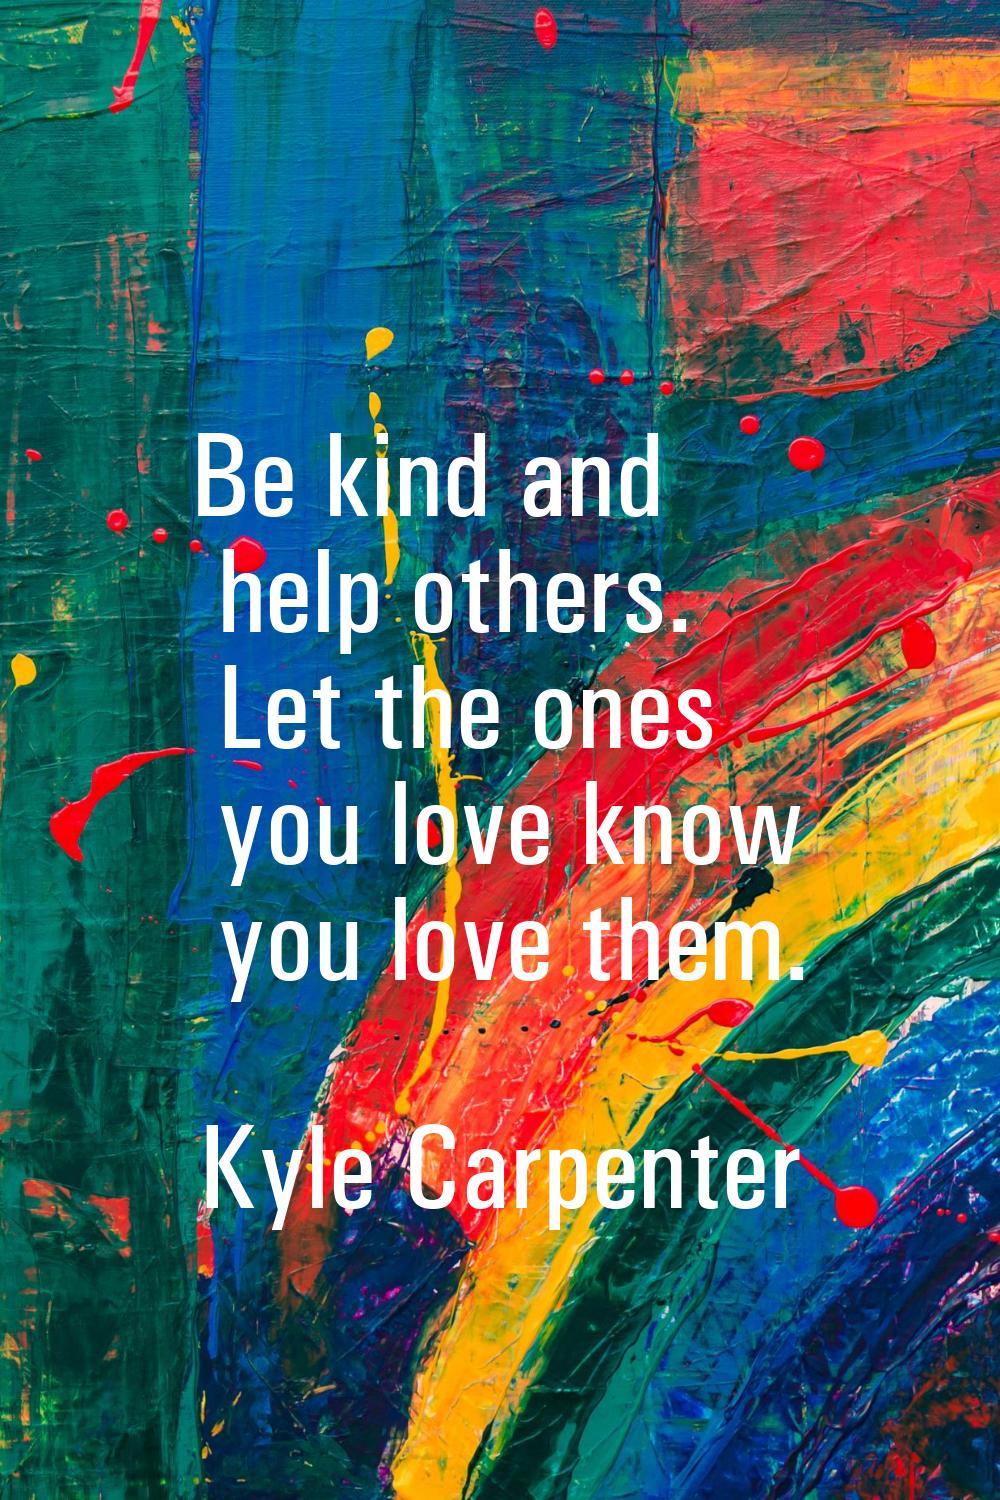 Be kind and help others. Let the ones you love know you love them.